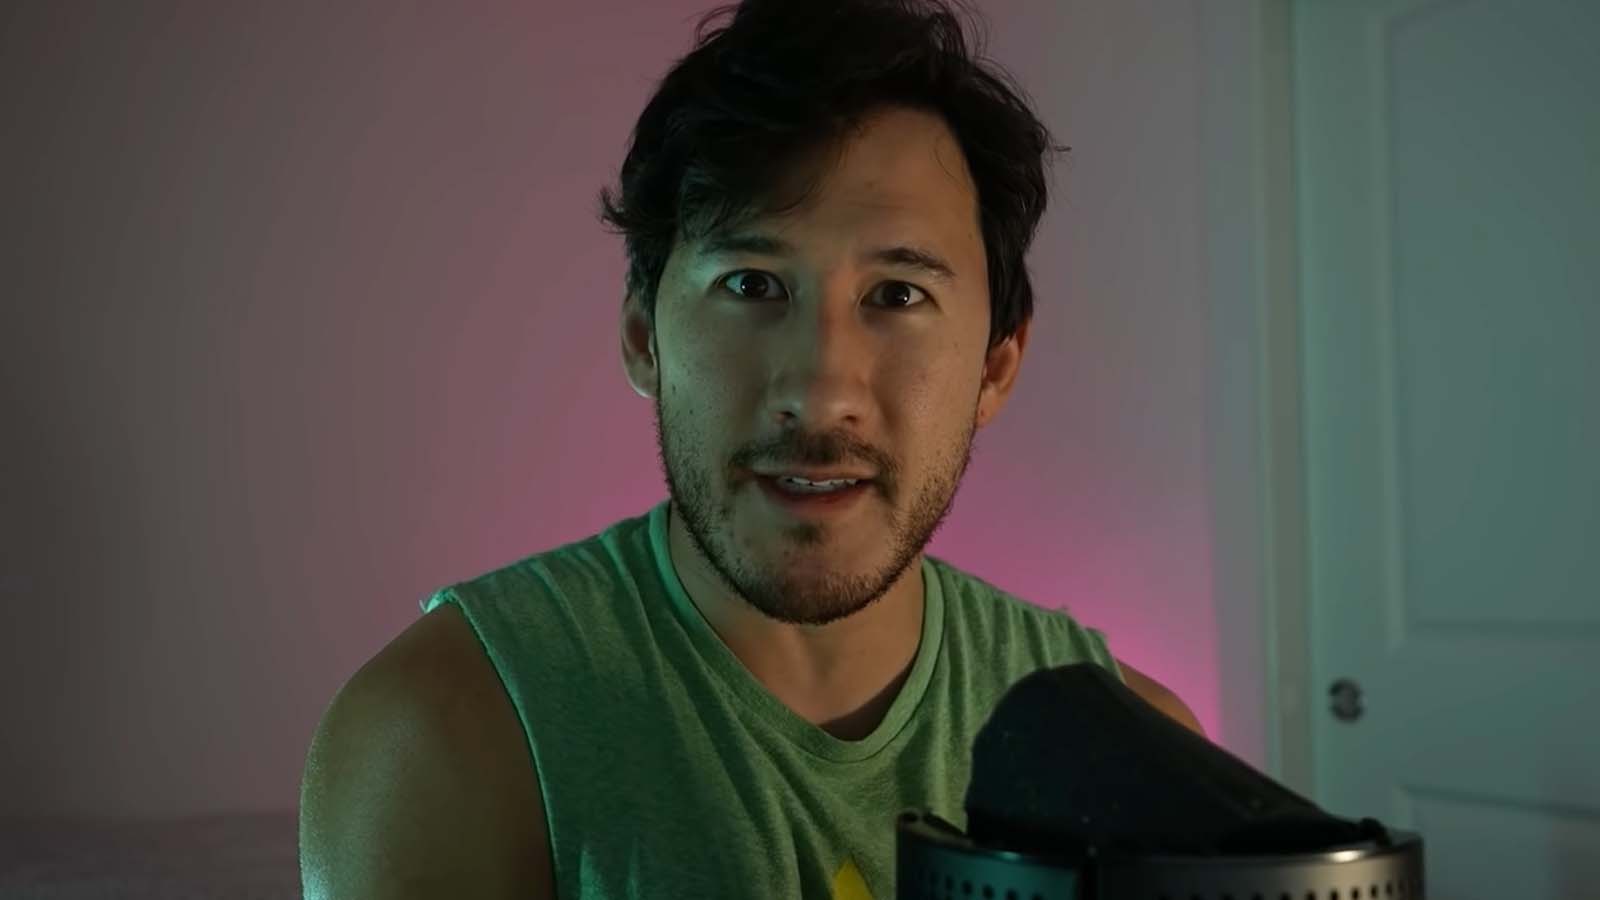 Markiplier — I saw the glitch on Mark's vid and I couldn't help